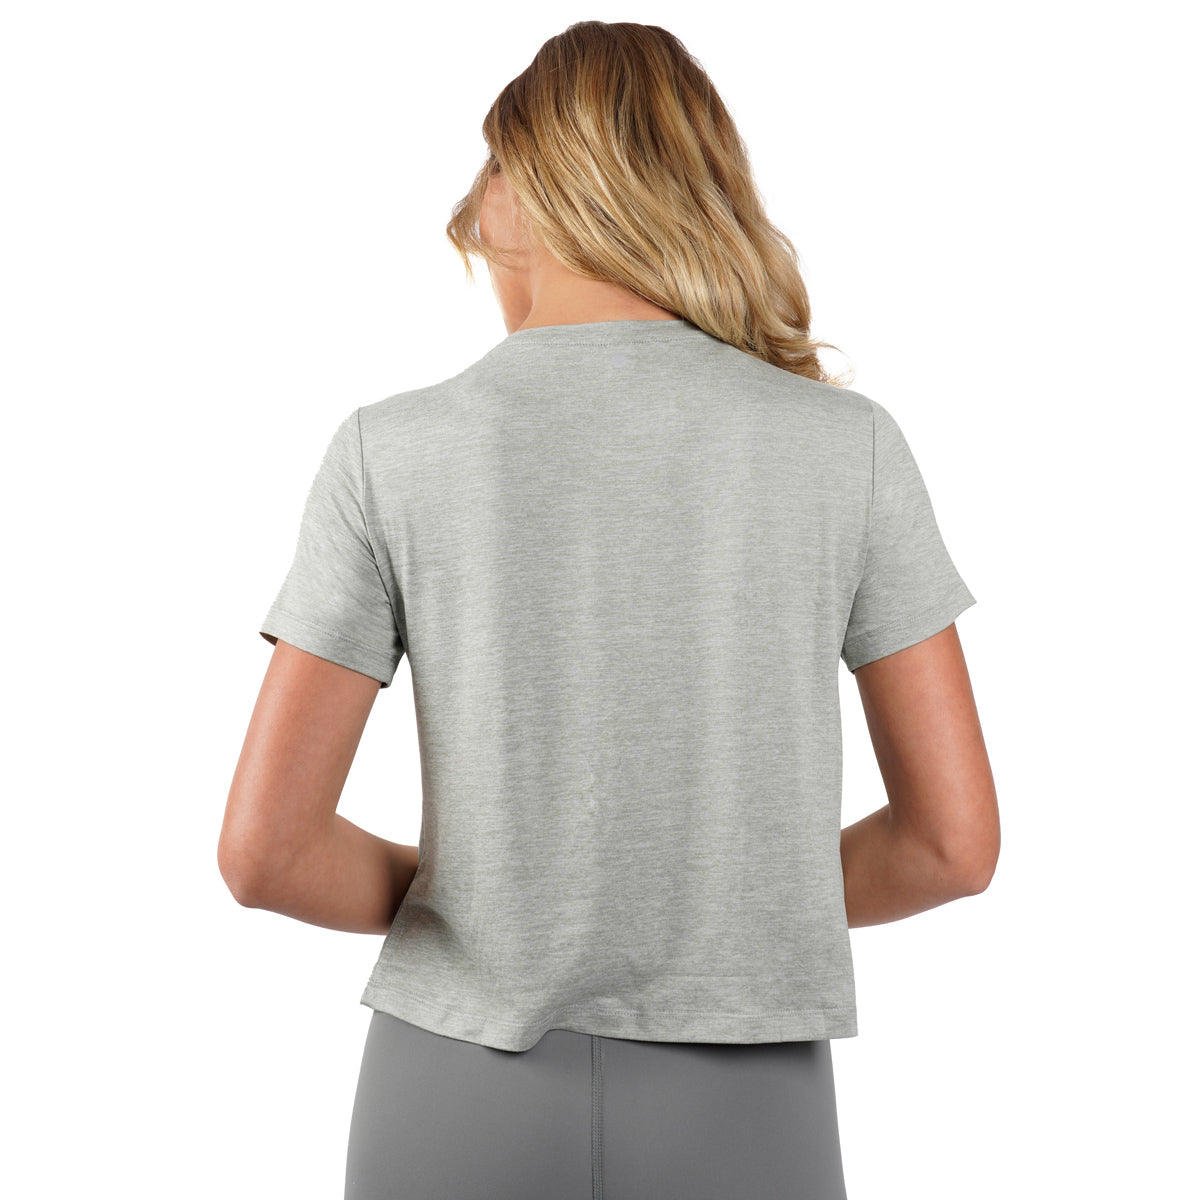 Heather Gray Cotton Blouse / Yoga Clothing / Oversized Short Sleeved Top /  Asymmetrical Top / Gift for Her / Yoga Top Aryasense TPRS14LG 